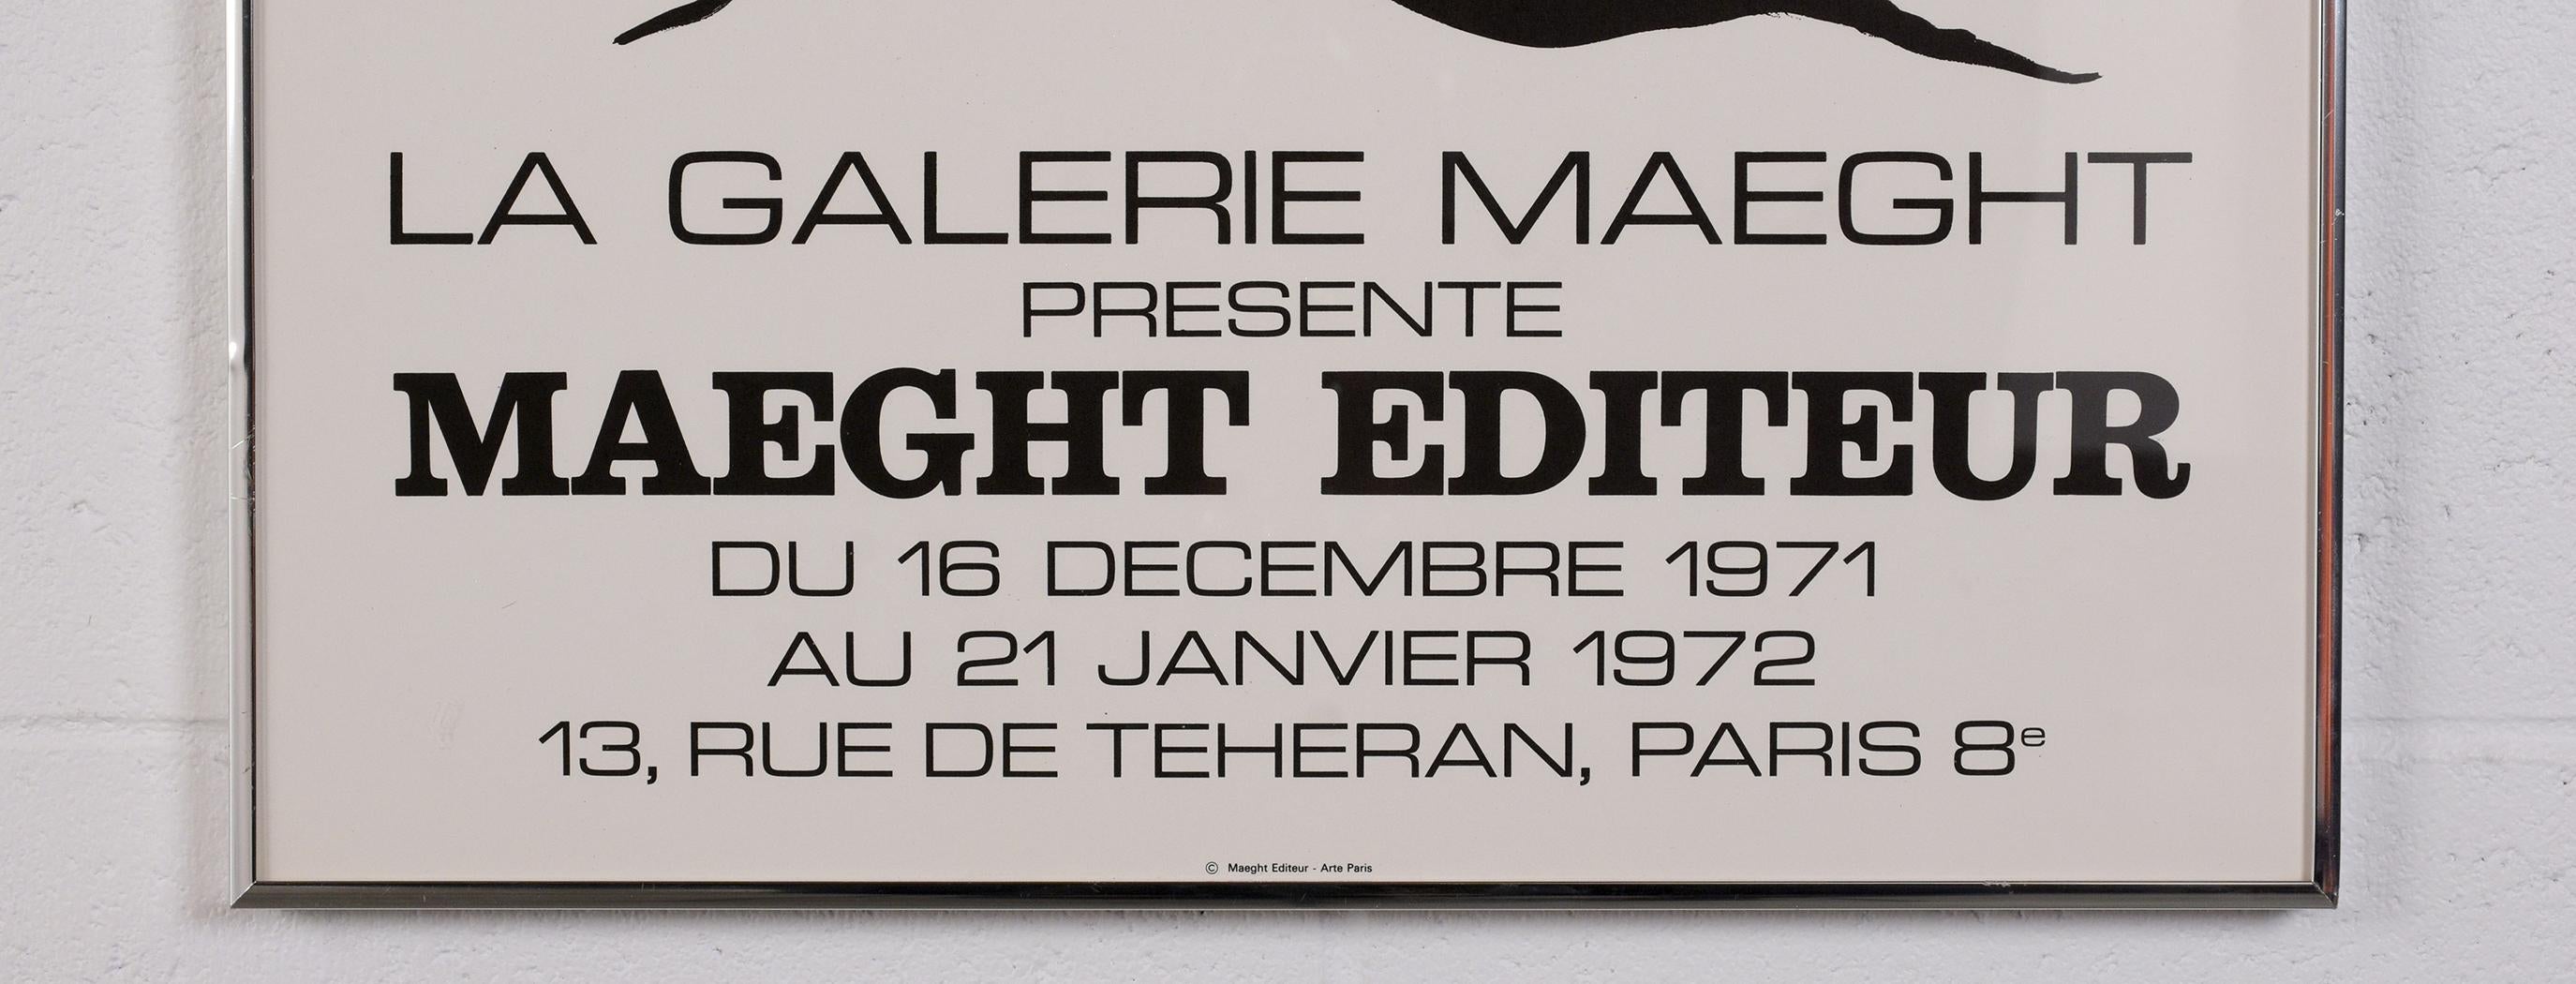 This Maeght Foundation Gallery Exhibition poster commemorating the Alexander Calder Exhibit which took place from December 16, 1971, to August 21, 1972, in Paris France is in excellent condition and beautifully framed. The poster's art designed by